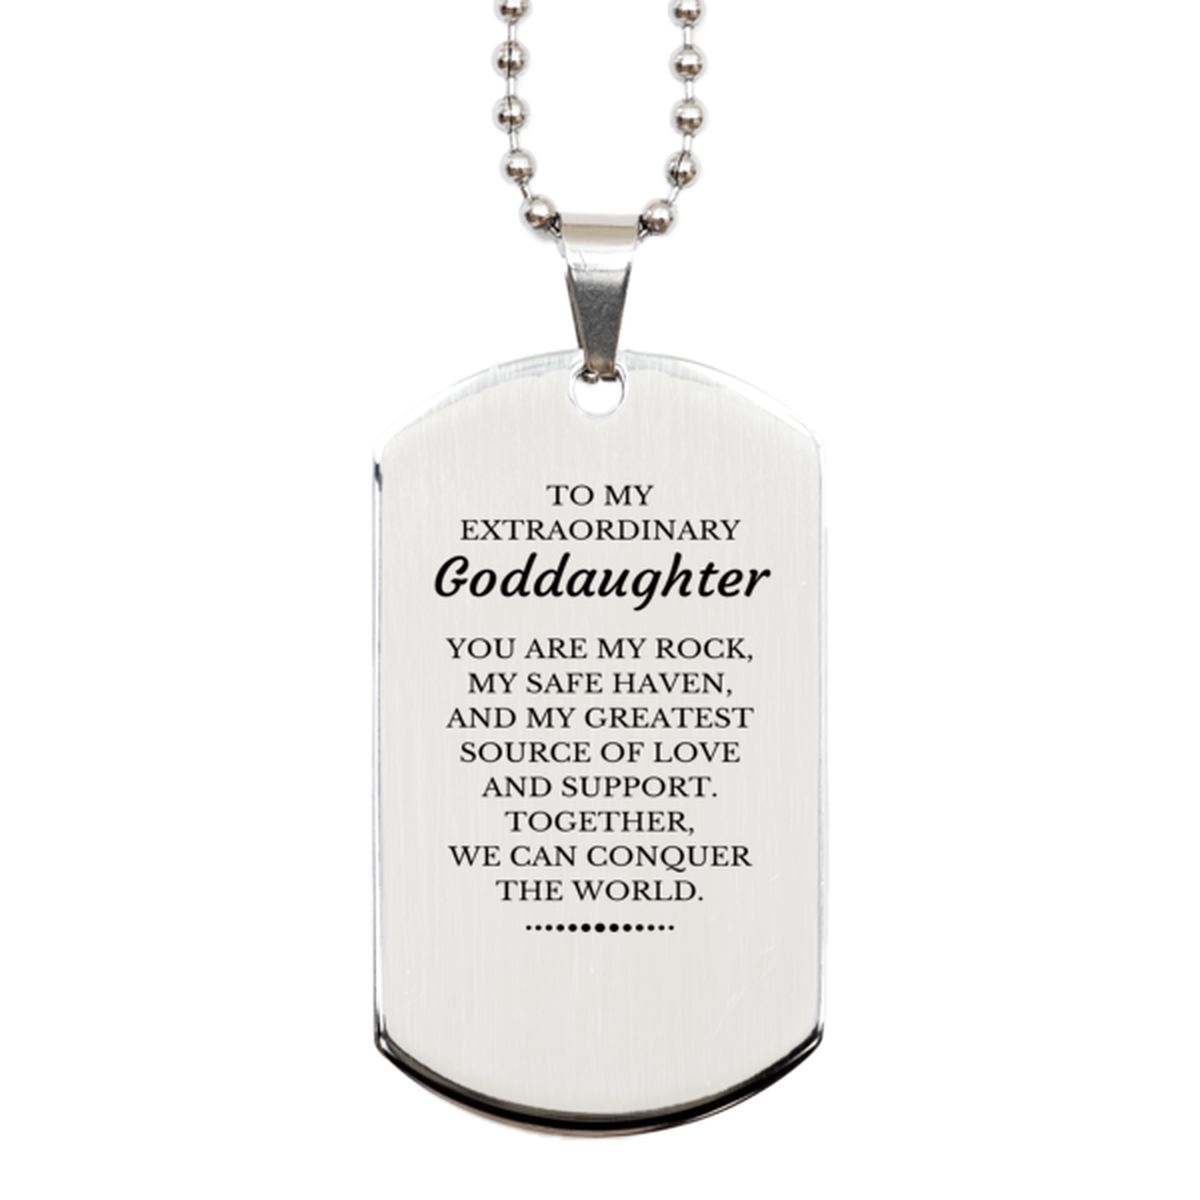 To My Extraordinary Goddaughter Gifts, Together, we can conquer the world, Birthday Silver Dog Tag For Goddaughter, Christmas Gifts For Goddaughter